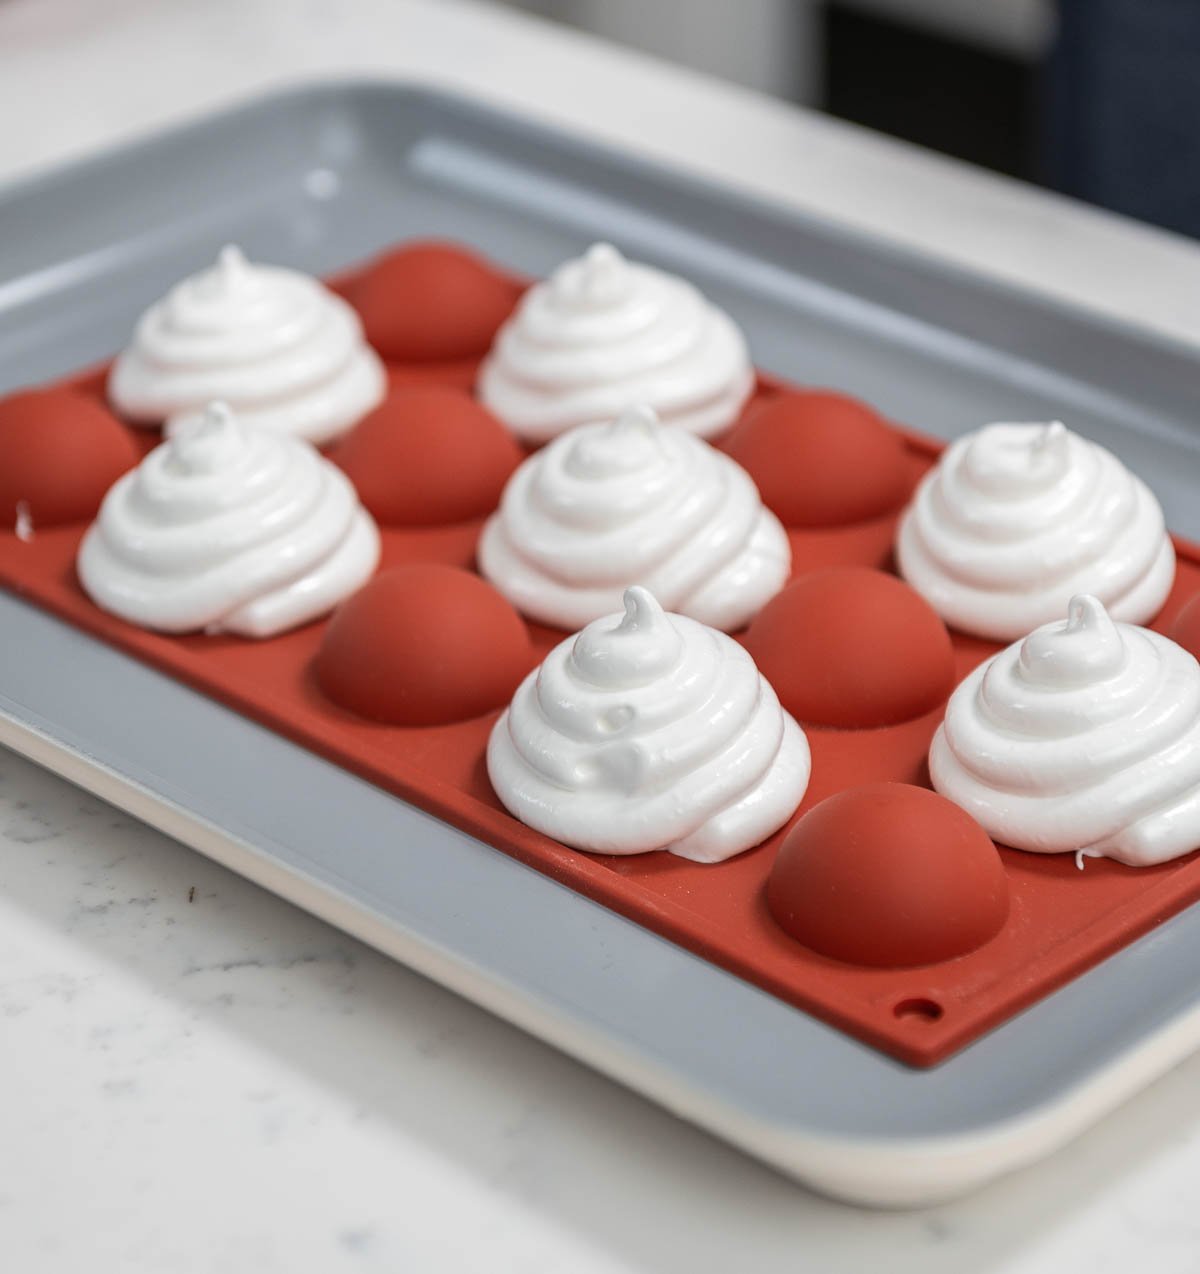 mini pavlova piped onto the back of every other alternating sphere silicone mold